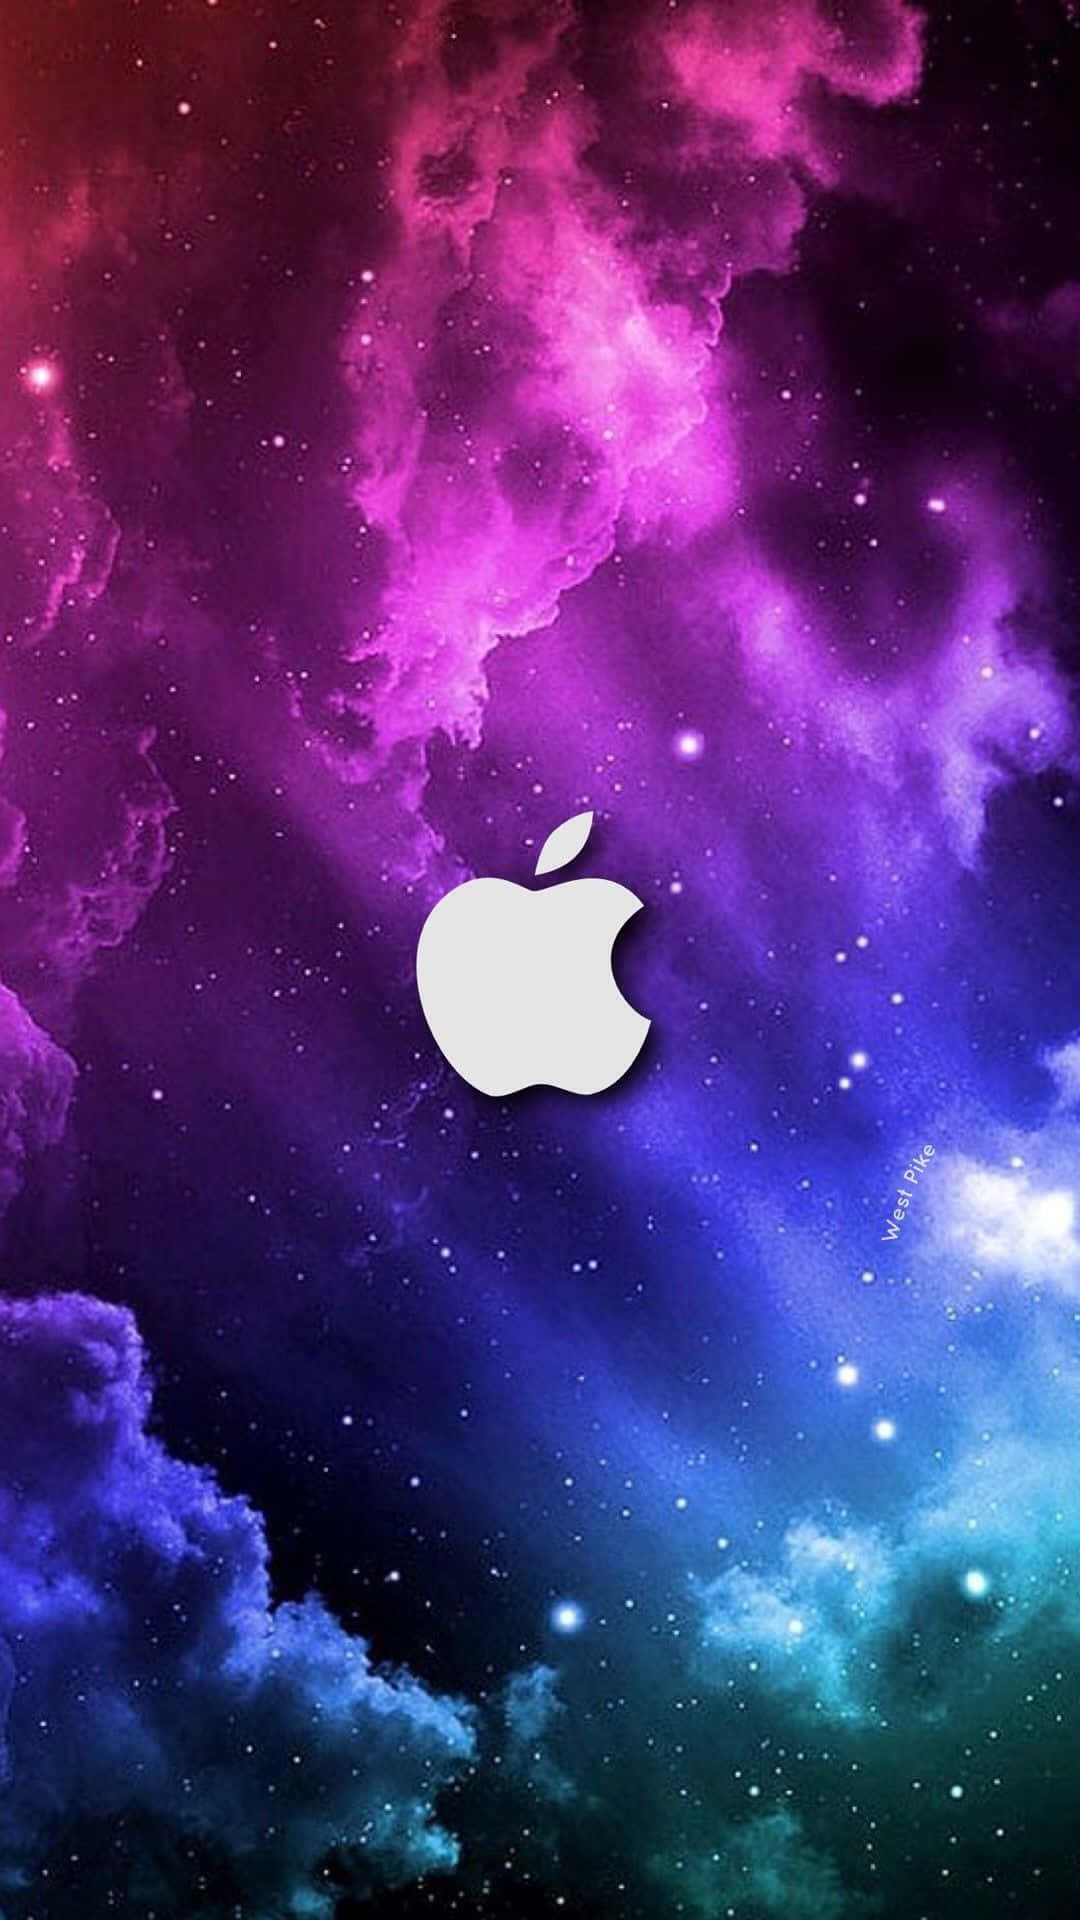 Colorful Gradient Sky Amazing Apple Hd Iphone